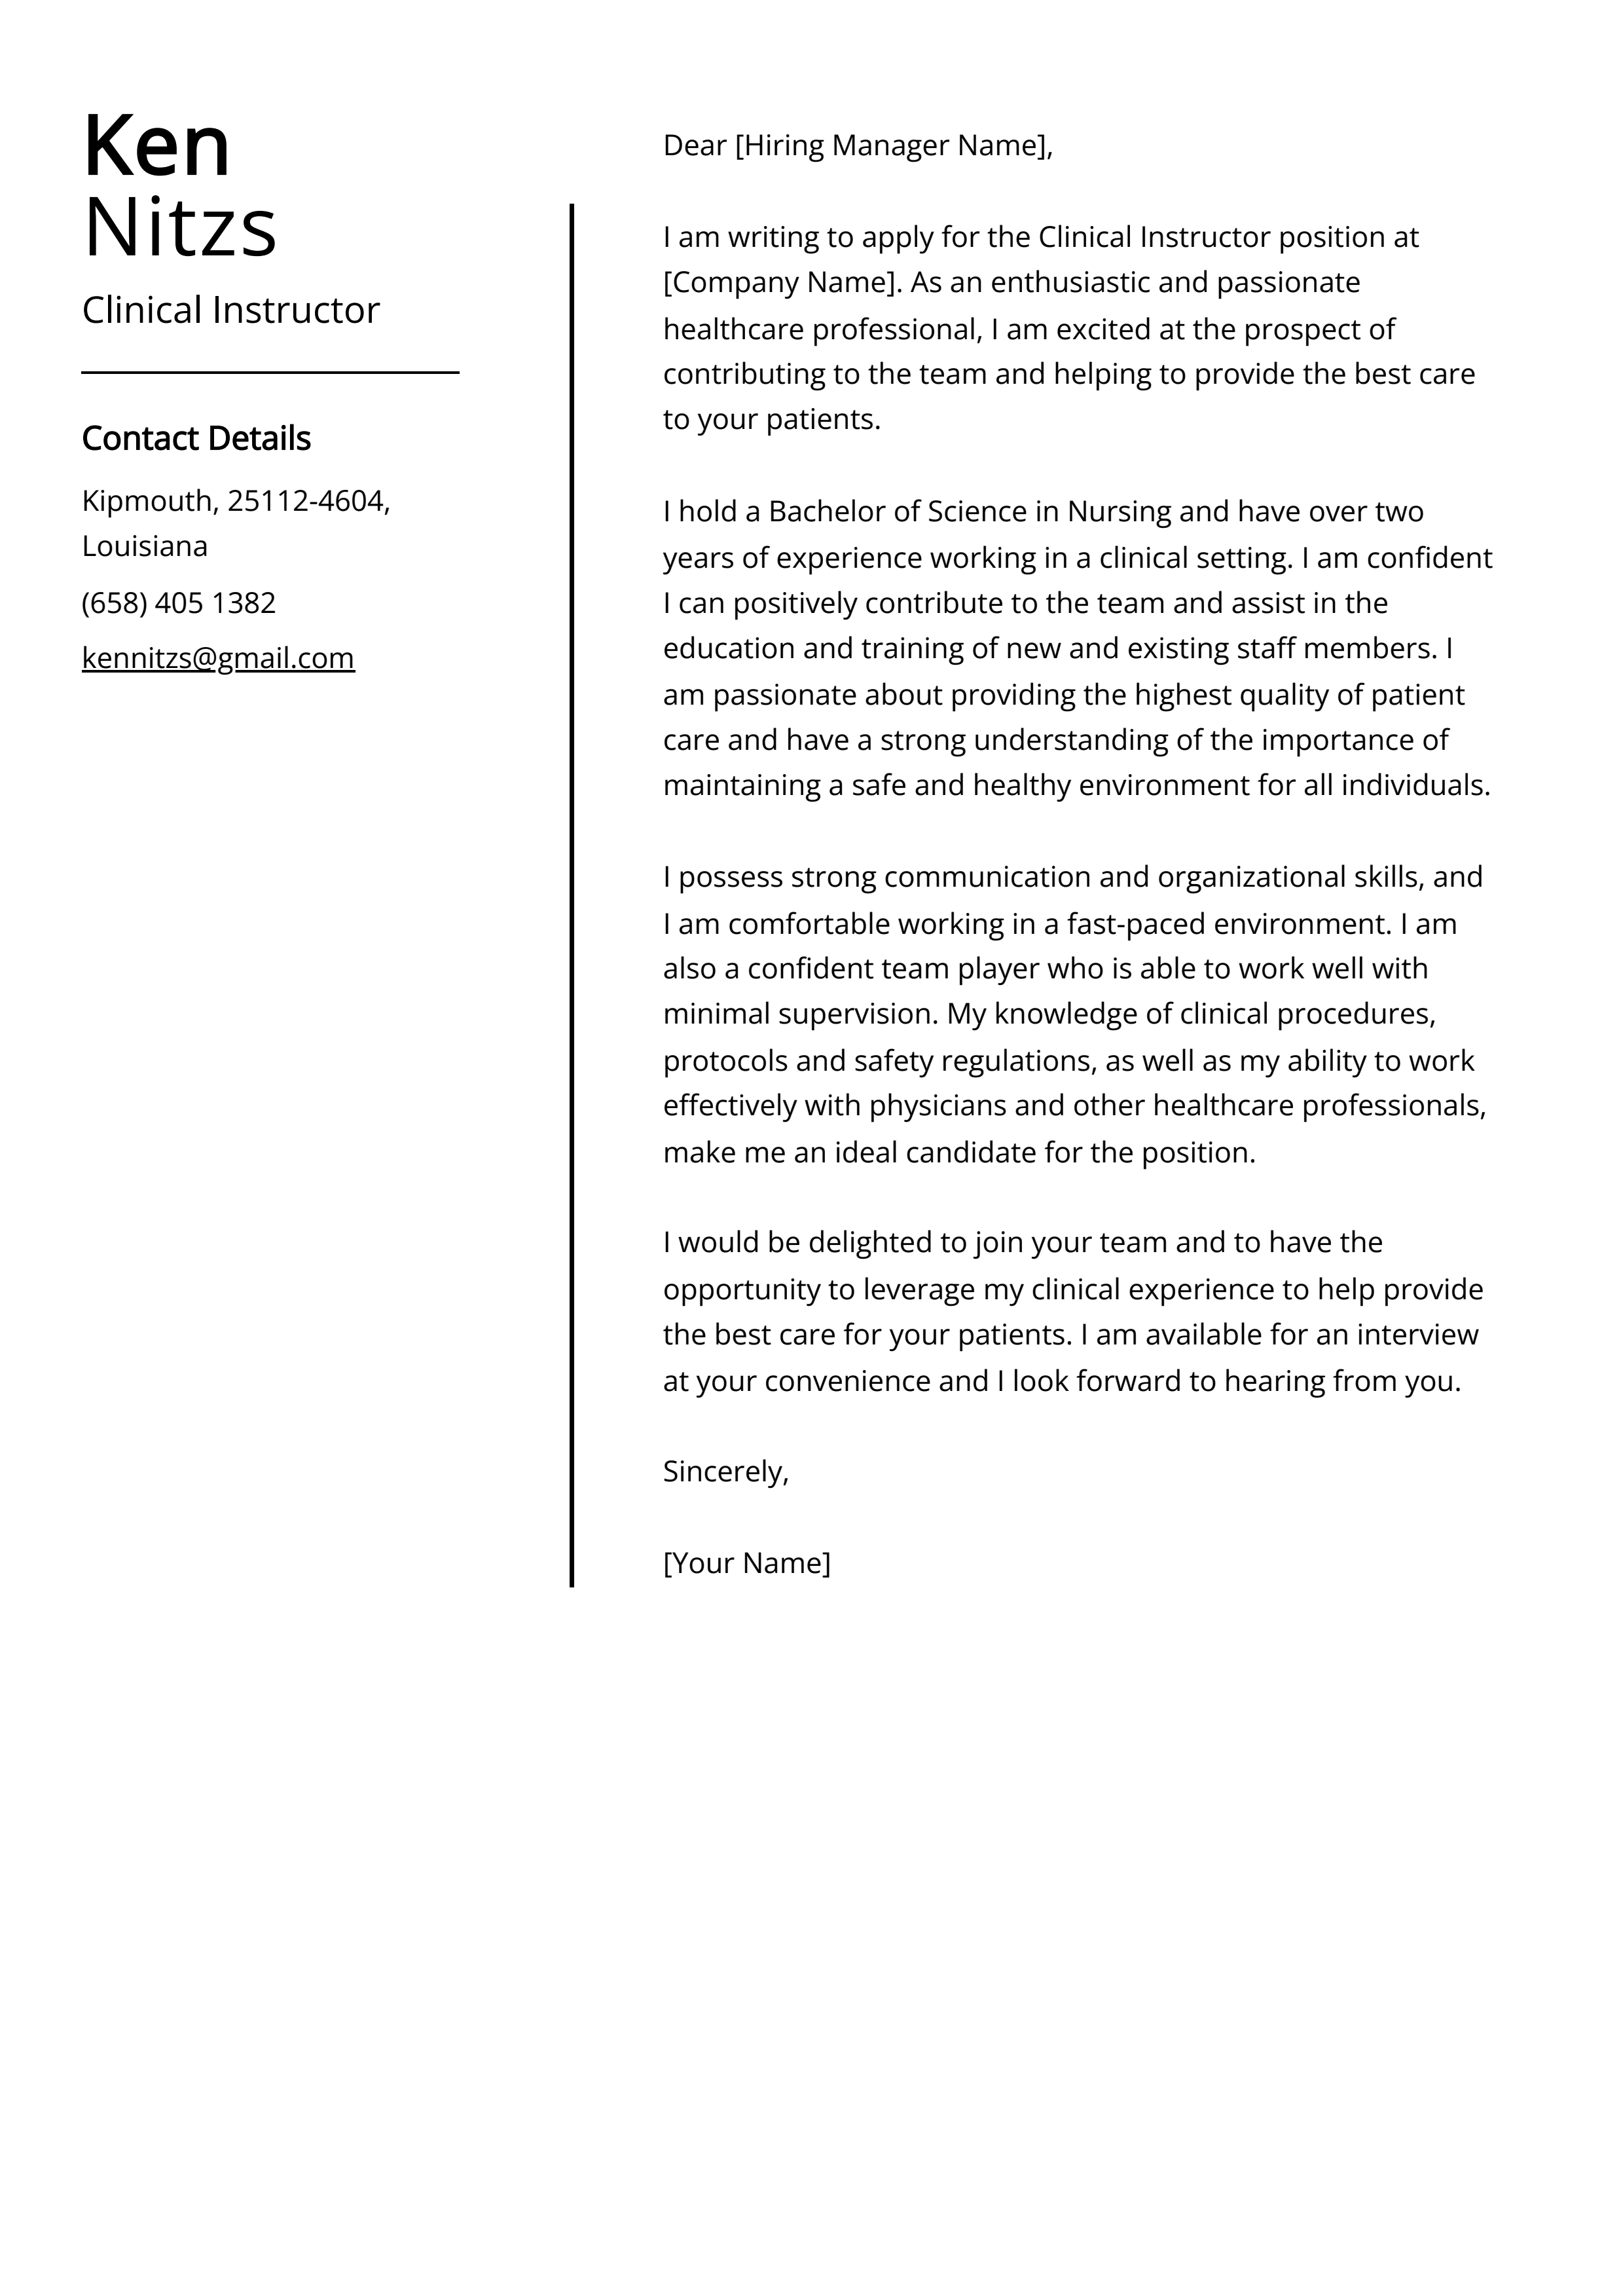 Clinical Instructor Cover Letter Example